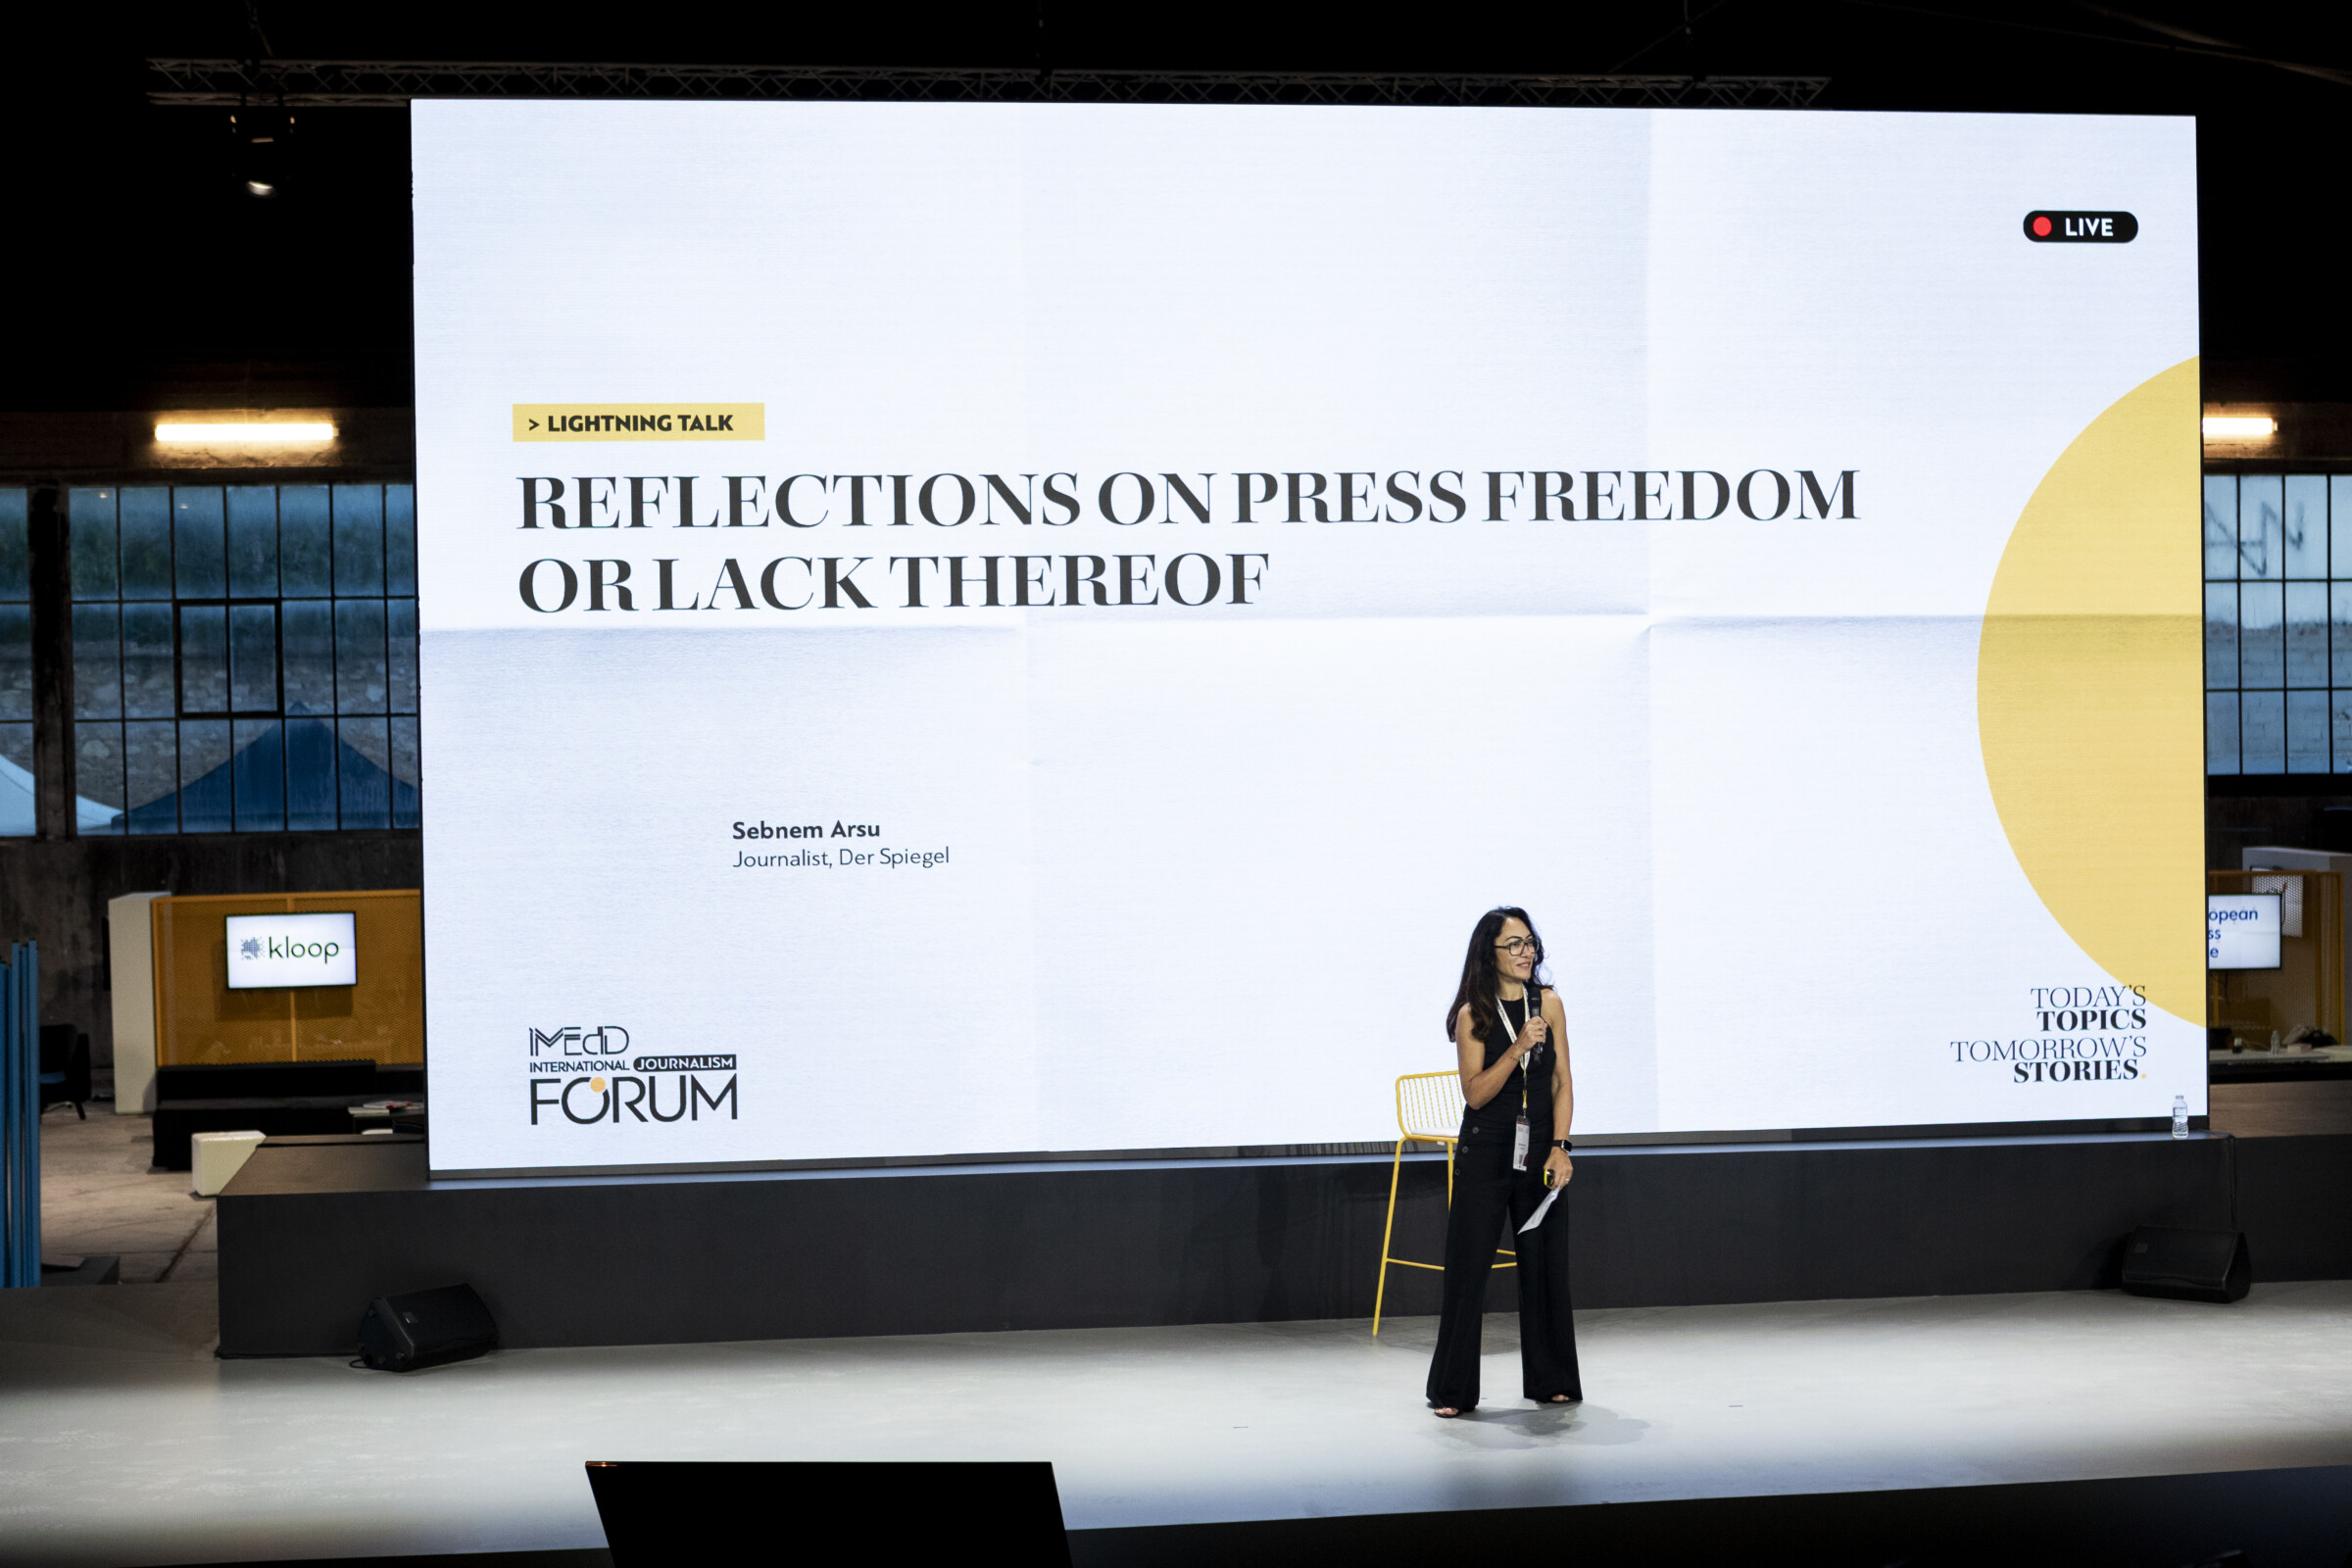 Turkish journalist Sebnem Arsu stands on the main stage of the iMEdD International Journalism Forum. She is holding a microphone and behind her is a large screen with the title of the panel she is participating in , entitled "Reflections on press freedom or lack thereof".